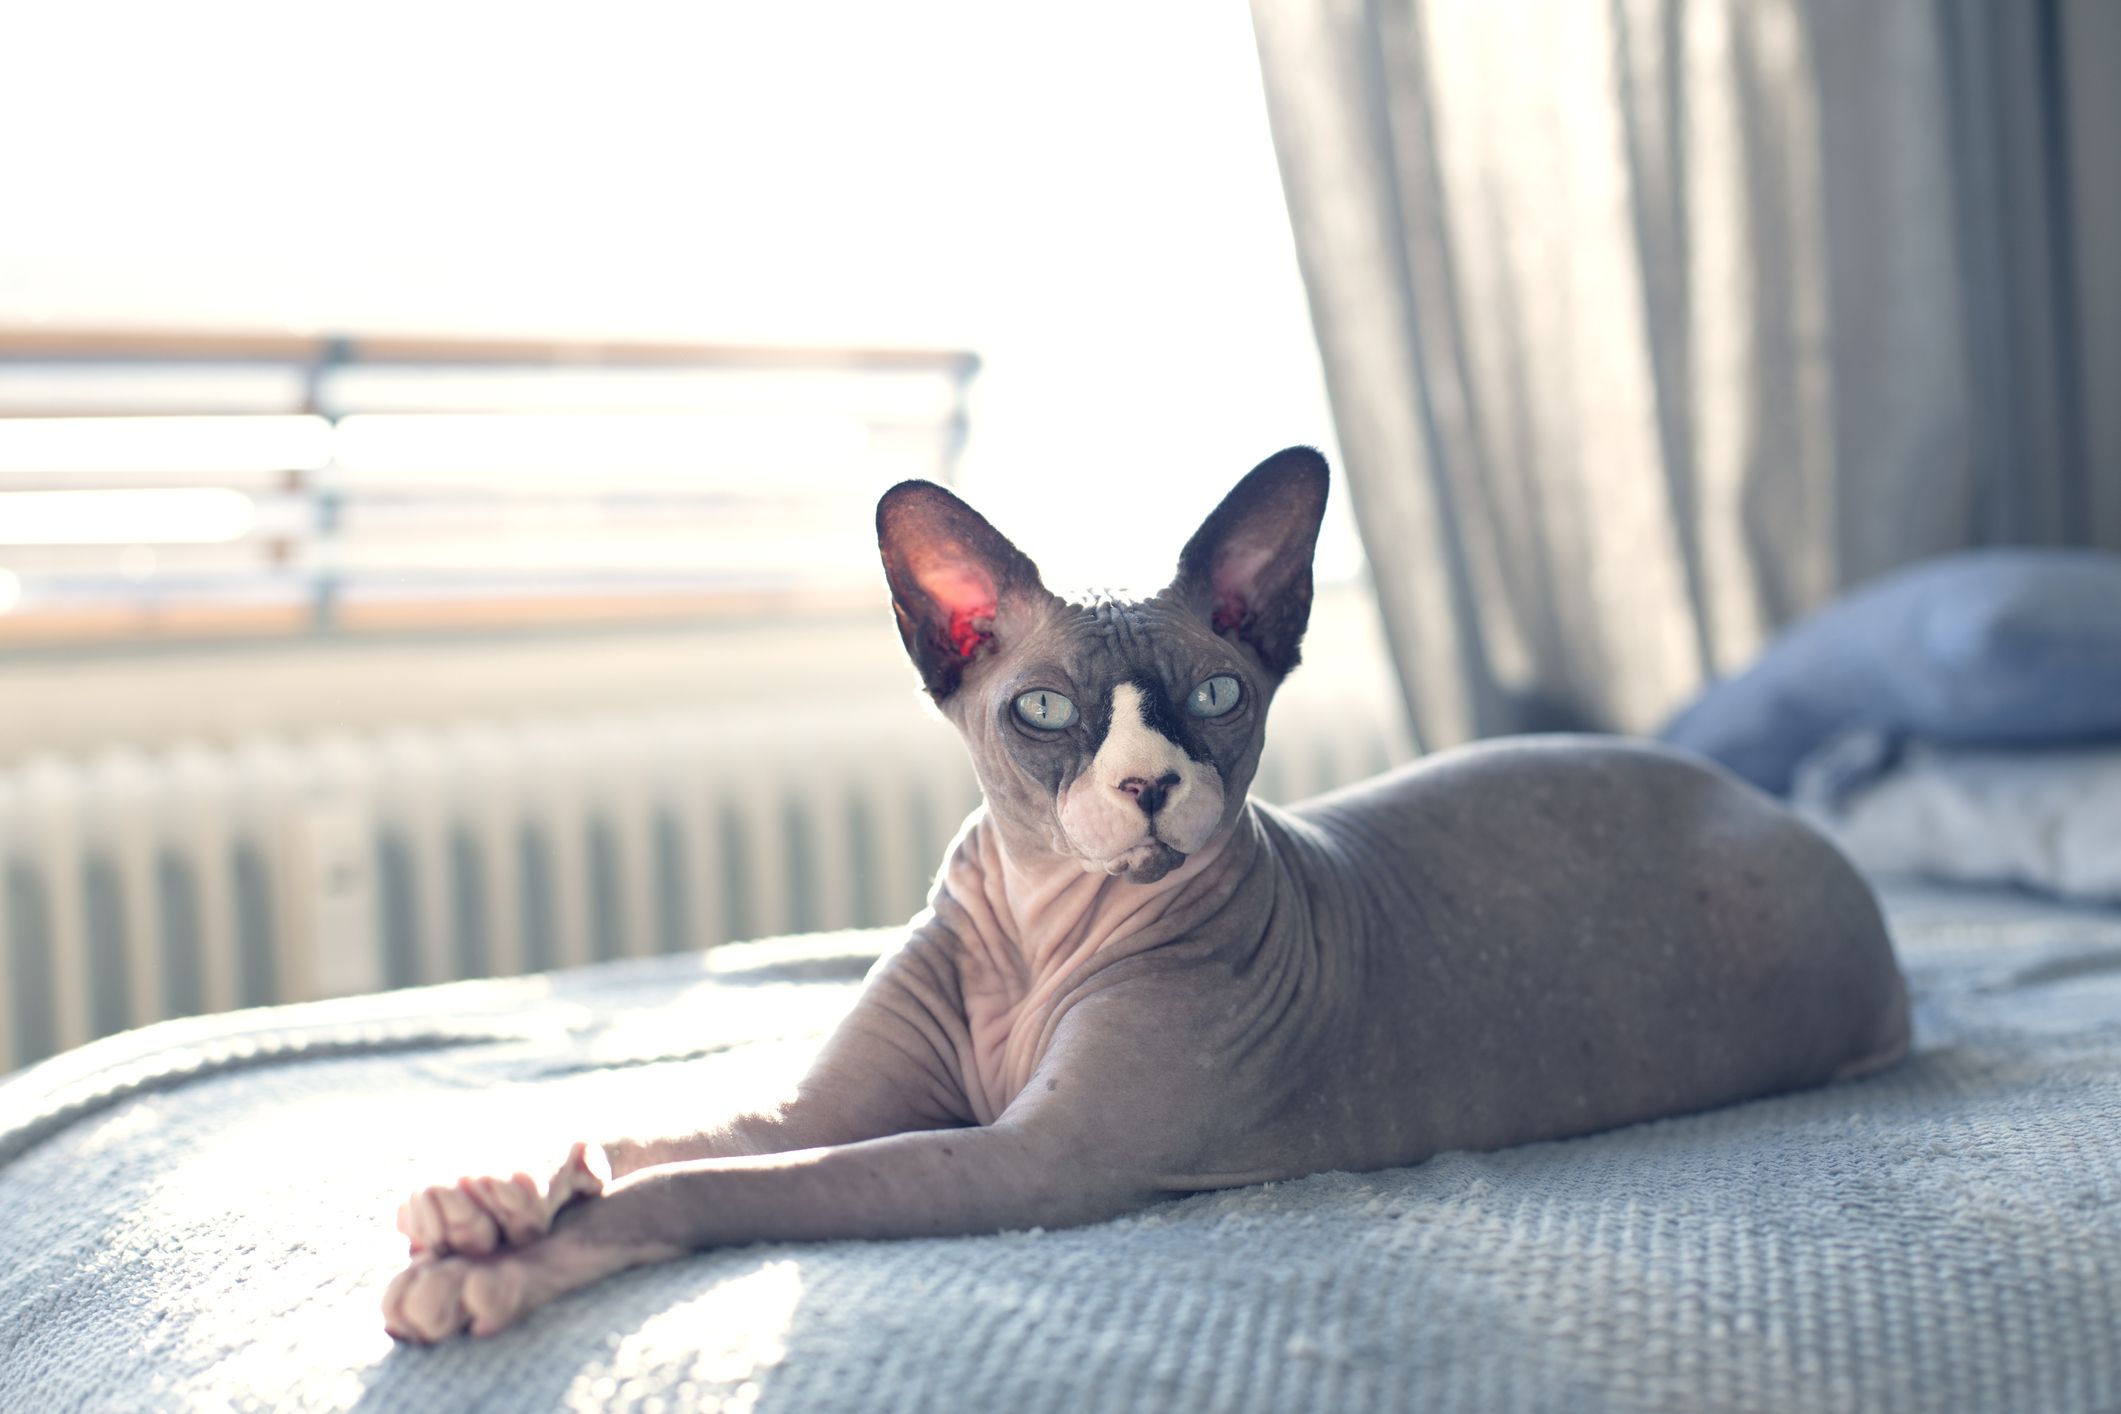 How many breeds of hairless cats are there?